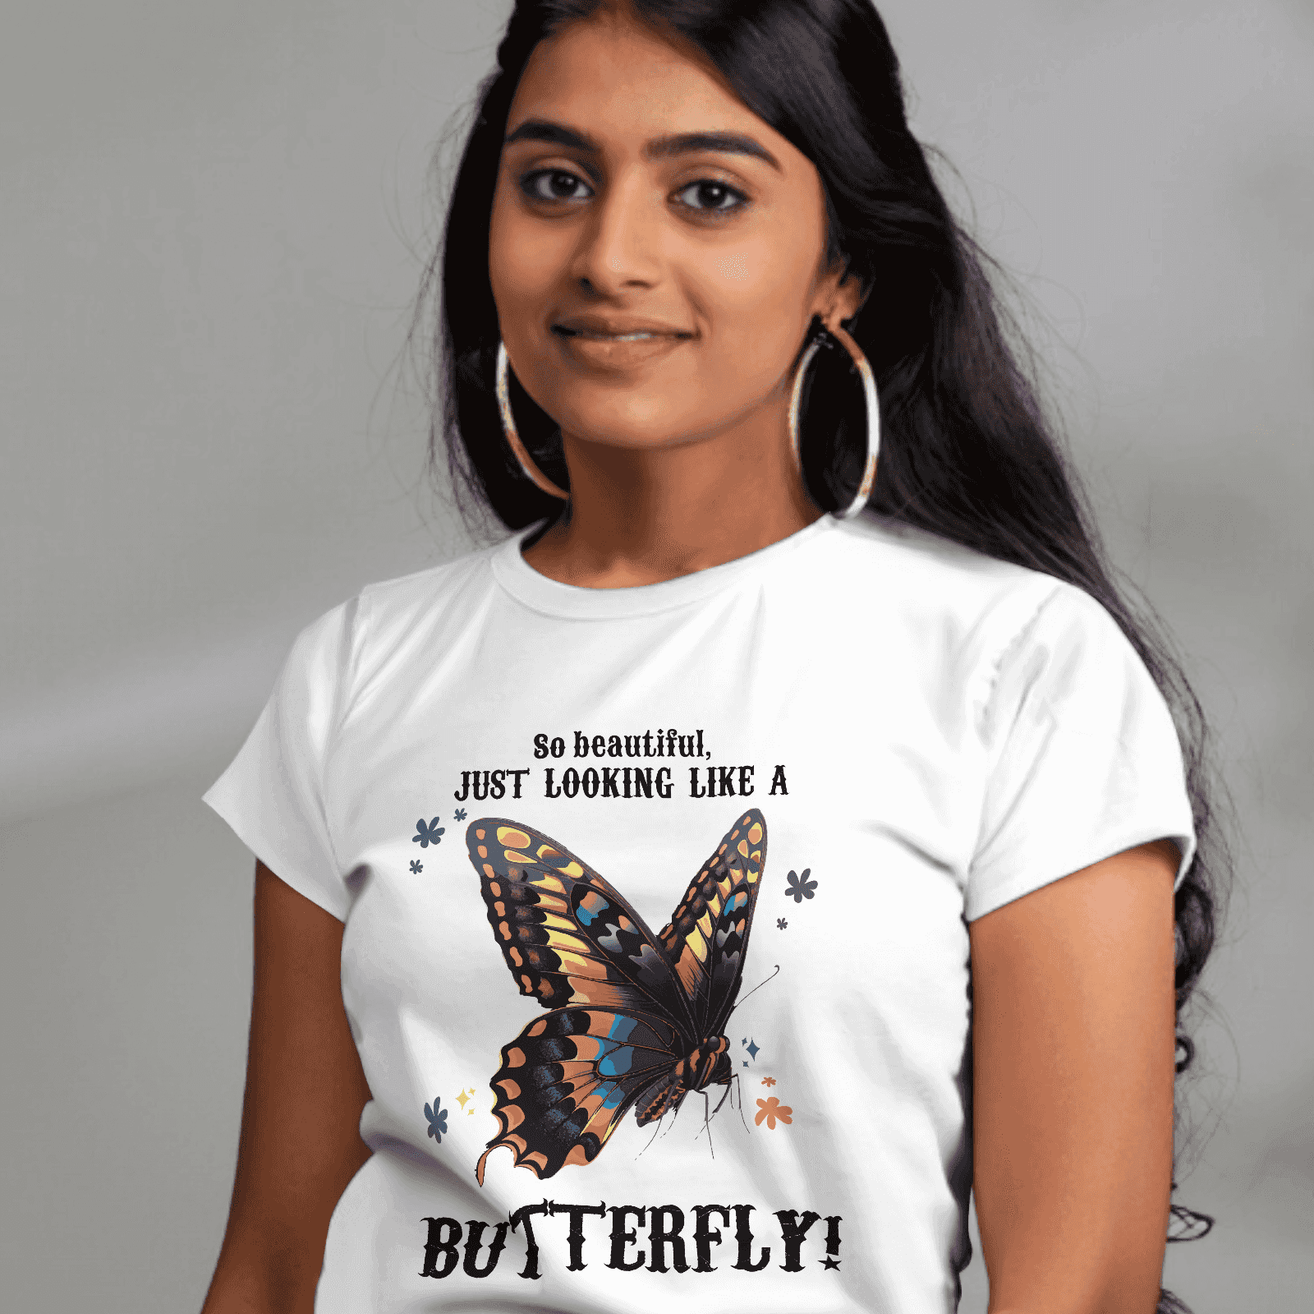 So Beautiful, Just Like a Butterfly Women's Graphic T-Shirt - Embrace Your Elegance